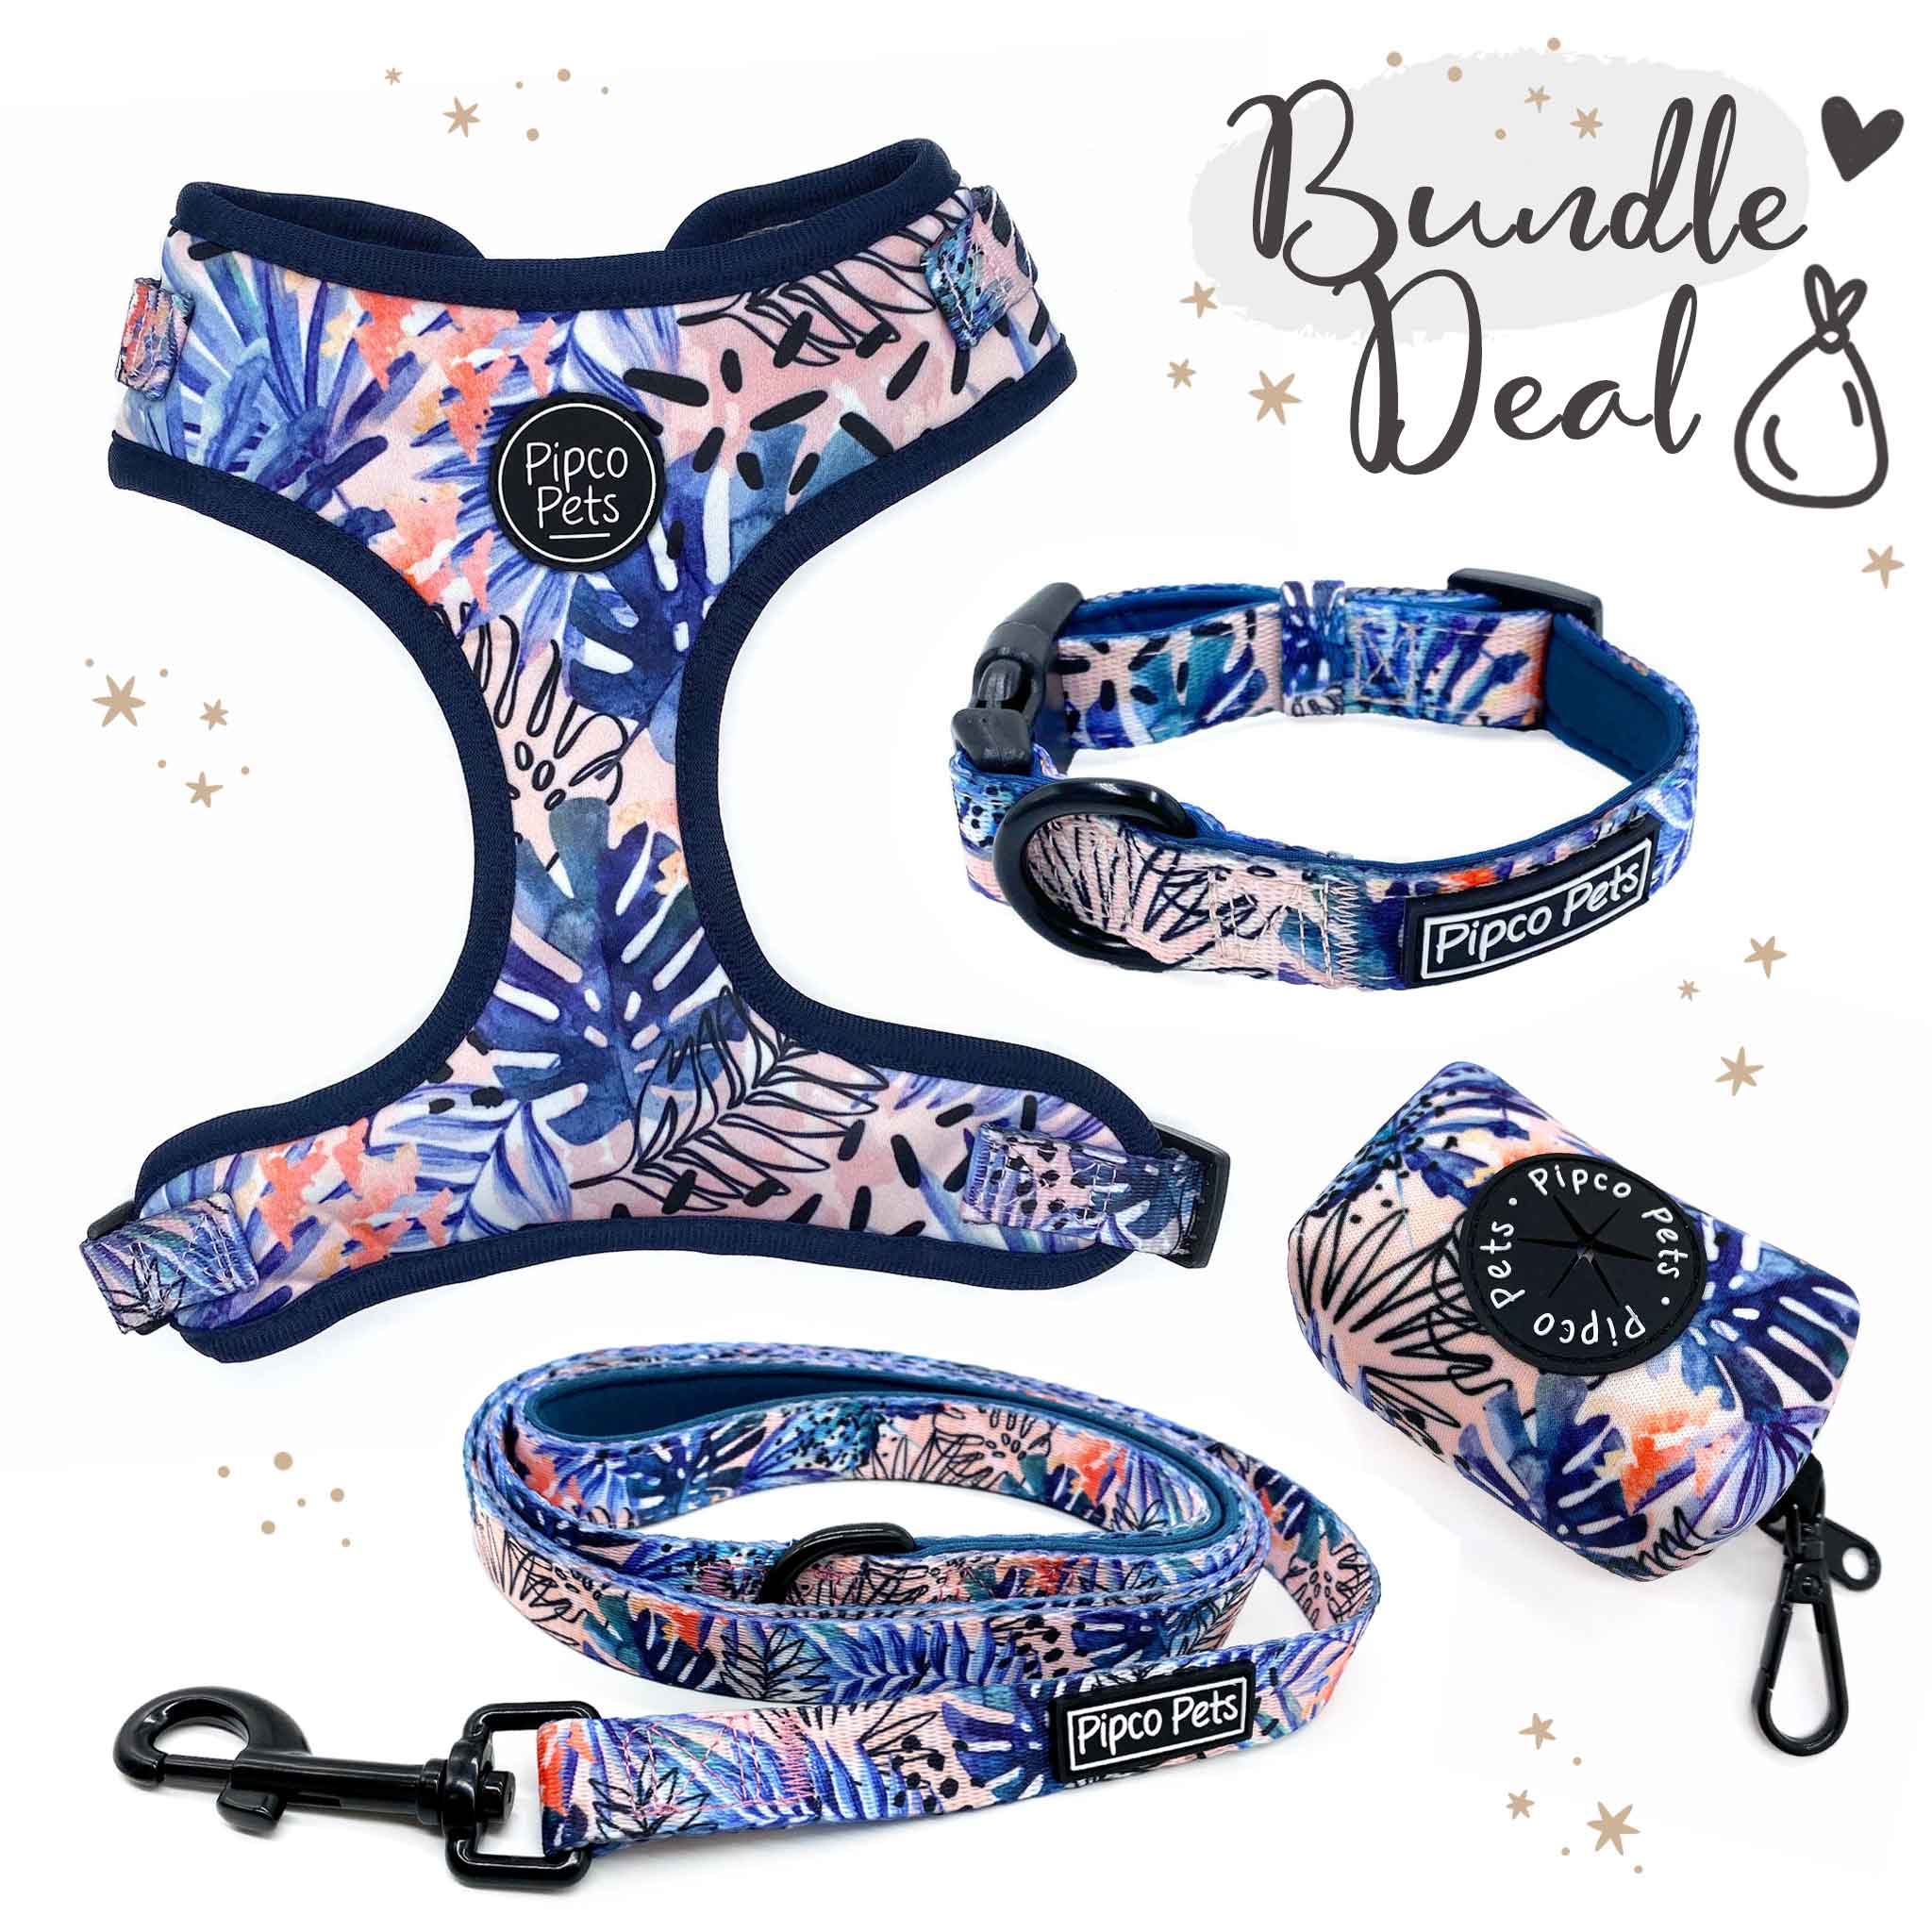 Bundle set including Pipco Pets dog harness, collar, lead, and poo bag dispenser with matching Tropic Fronds tropical leaves print pattern in blue